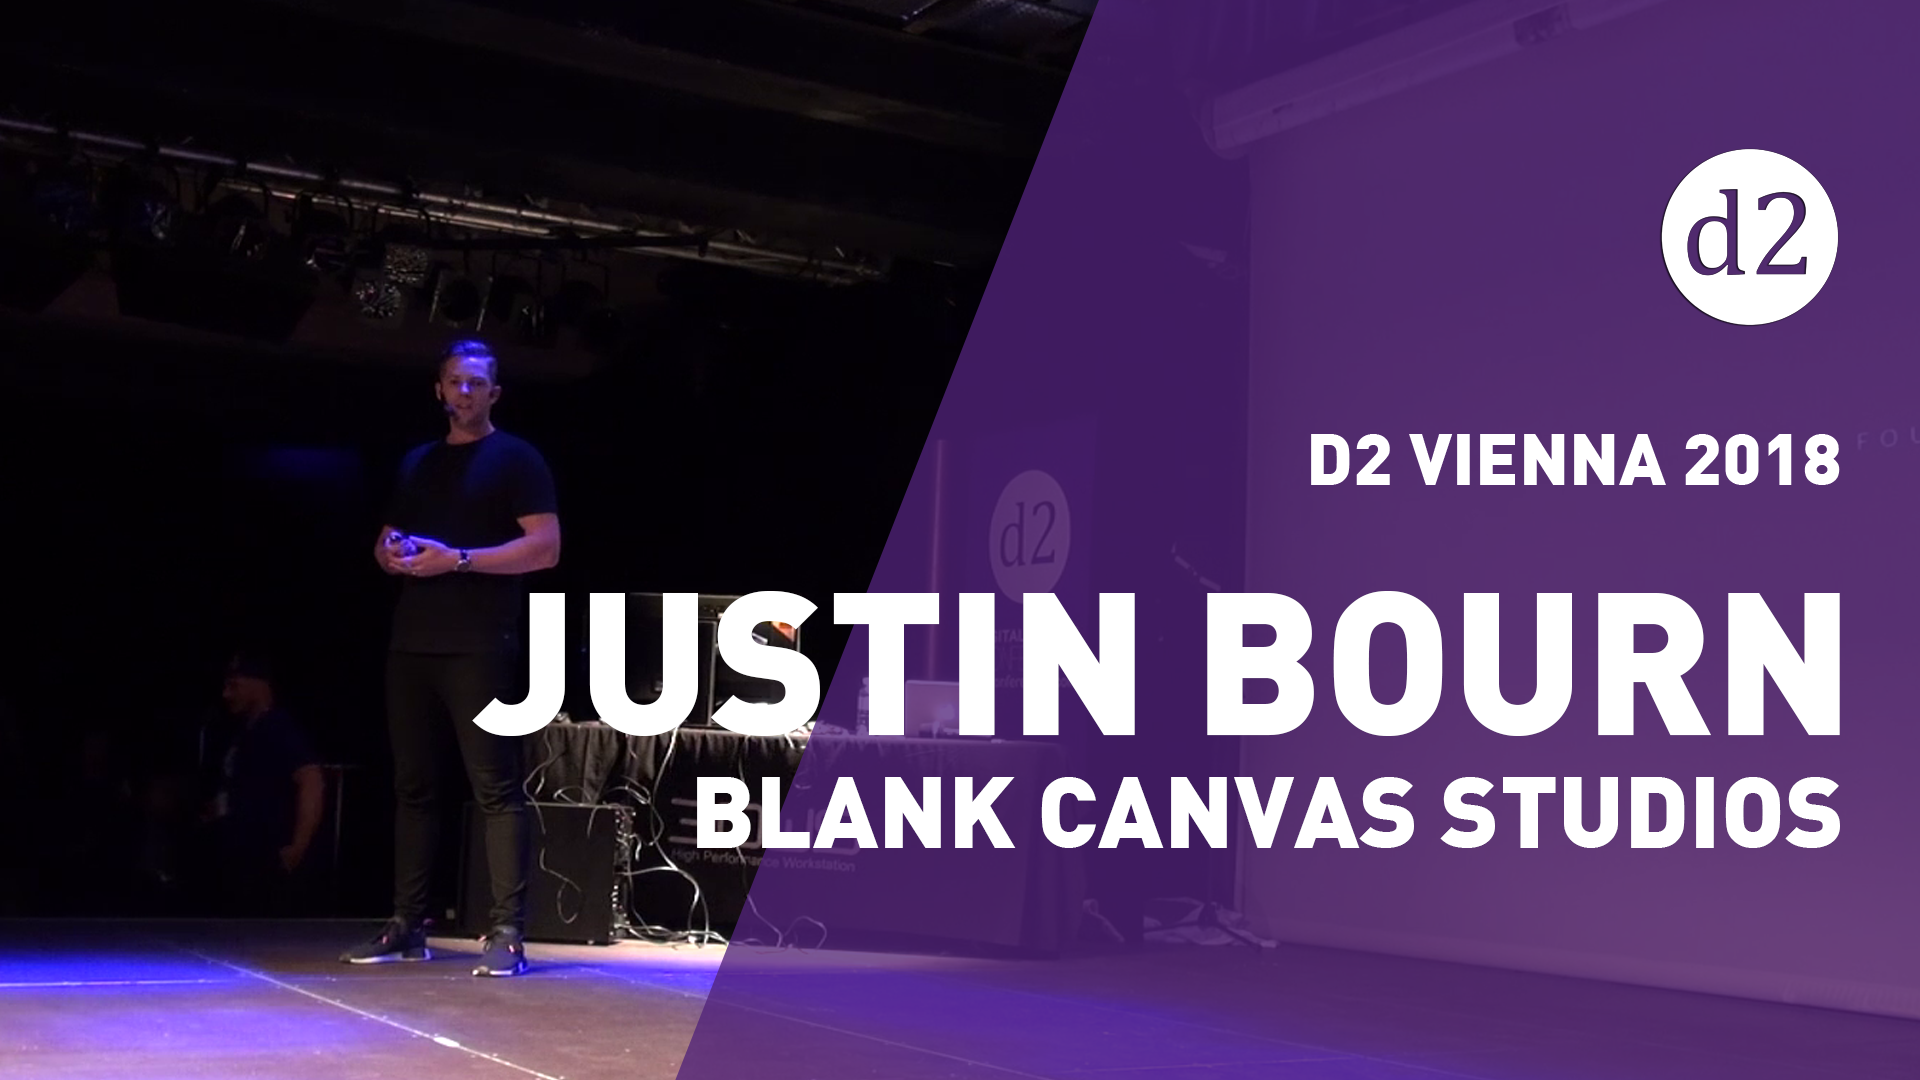 D2 Vienna 2018: Justin Bourn from Blank Canvas Studios